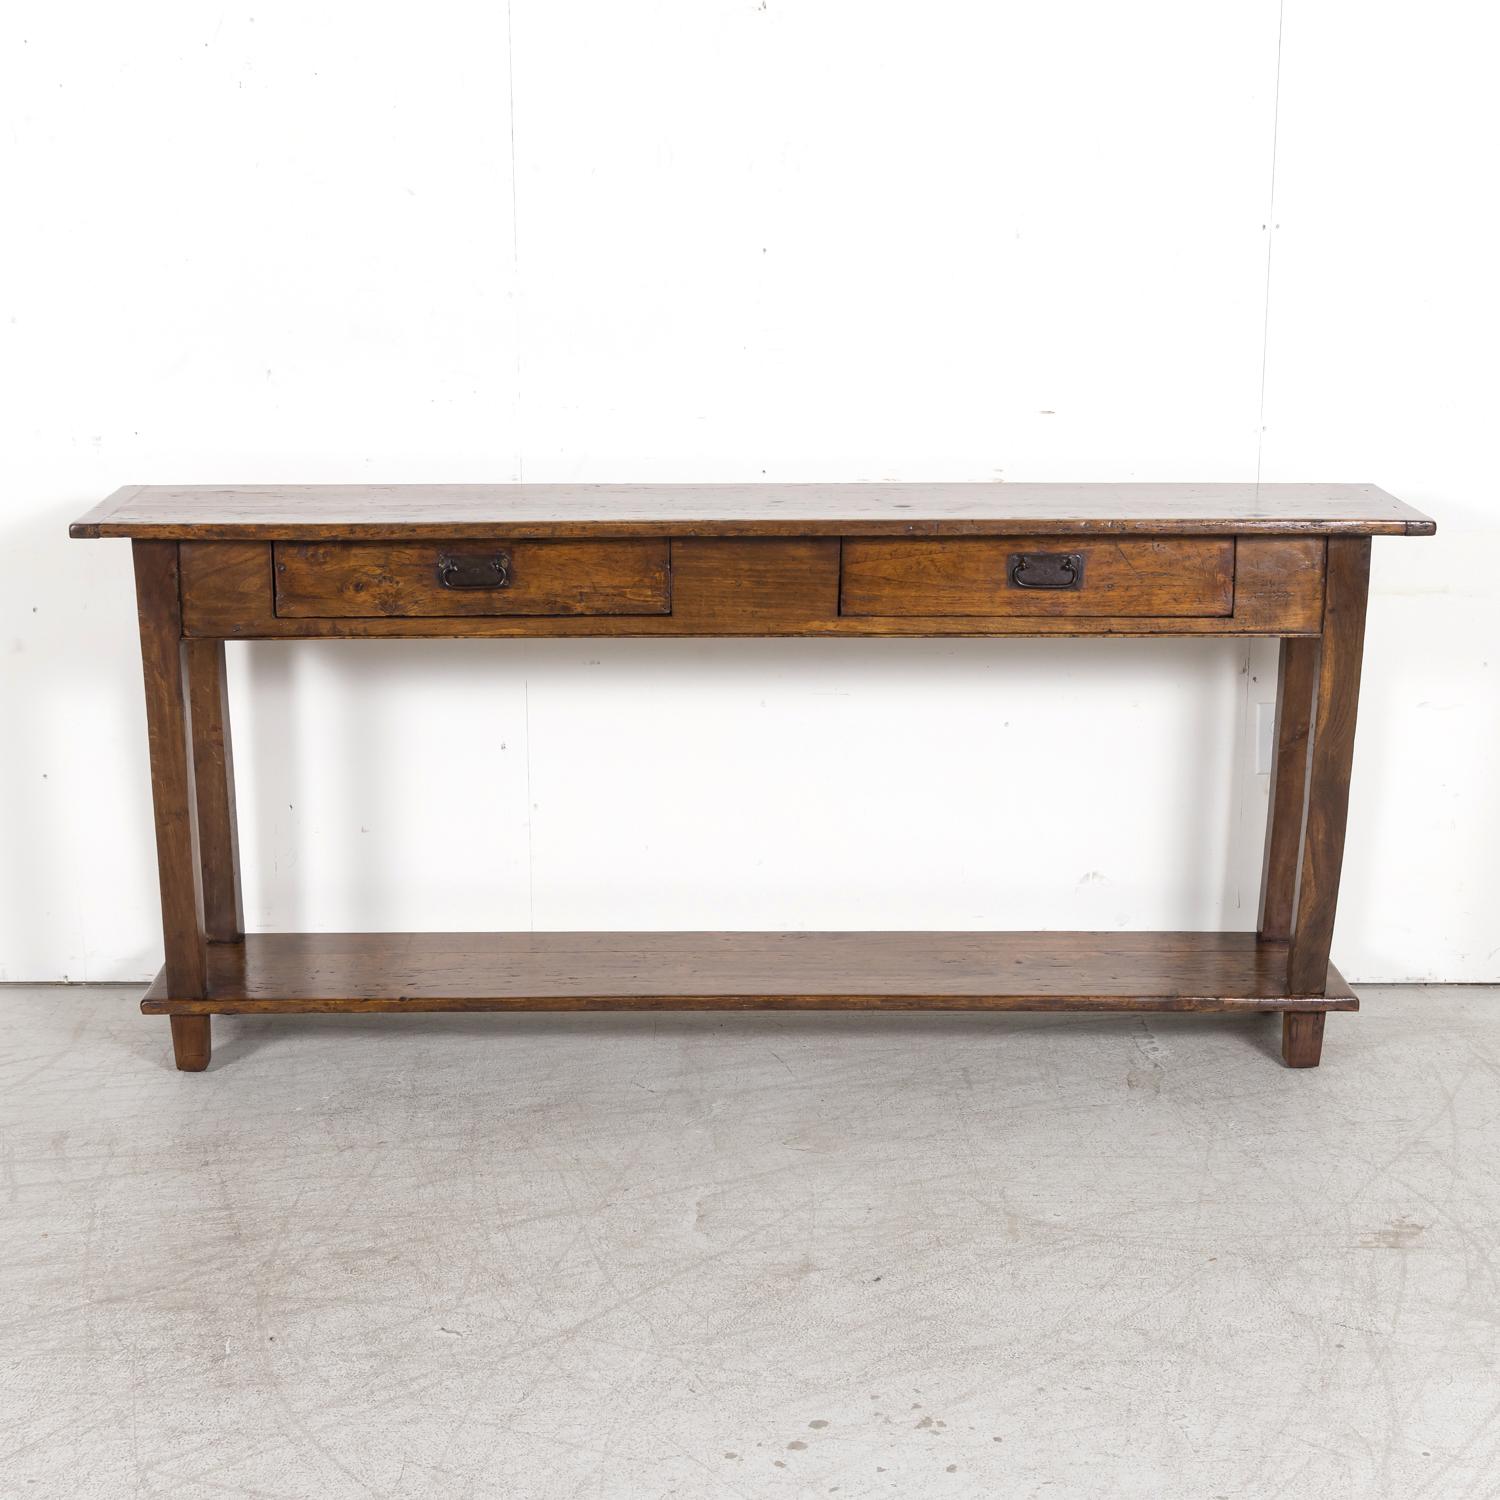 A handsome rustic mid-19th century Country French console table converted from an antique farm table hand crafted in Normandy, circa 1850s. Walnut plank top above a solid oak frame featuring two drawers with drop bail brass handles. Raised on square